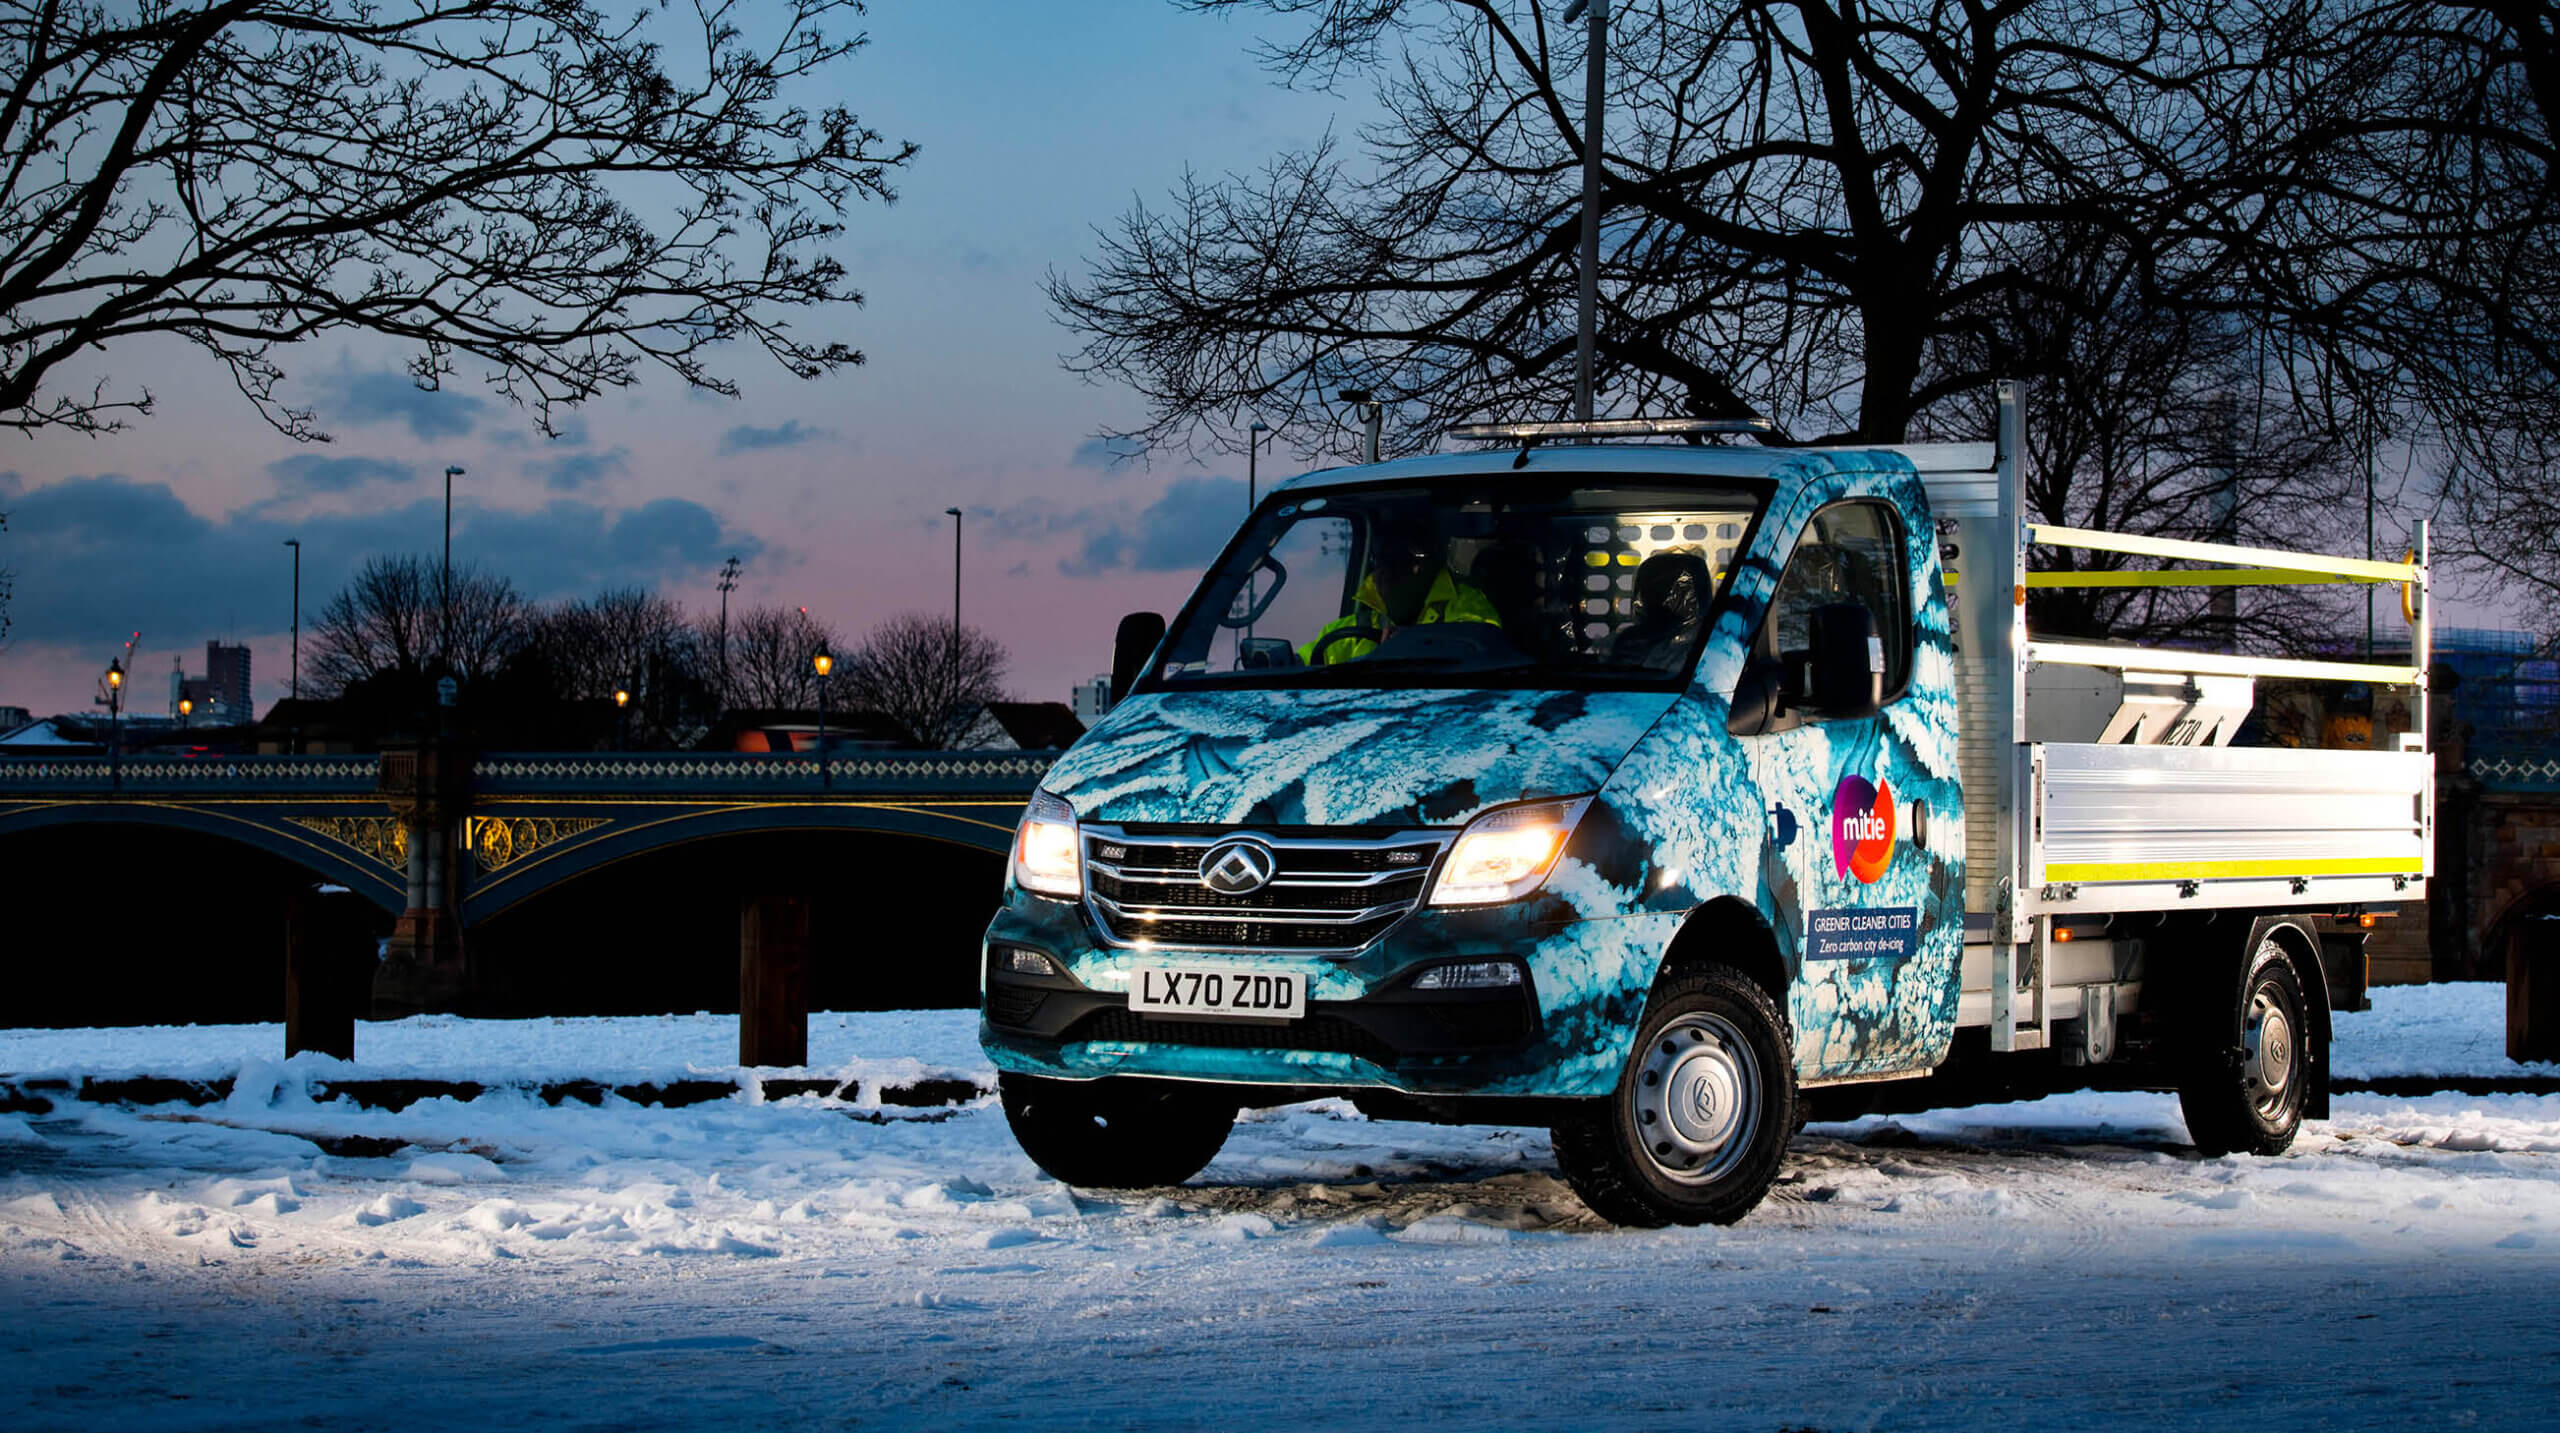 Mitie branded van in a snowy landscape, with the cab decorated with a snowflake pattern